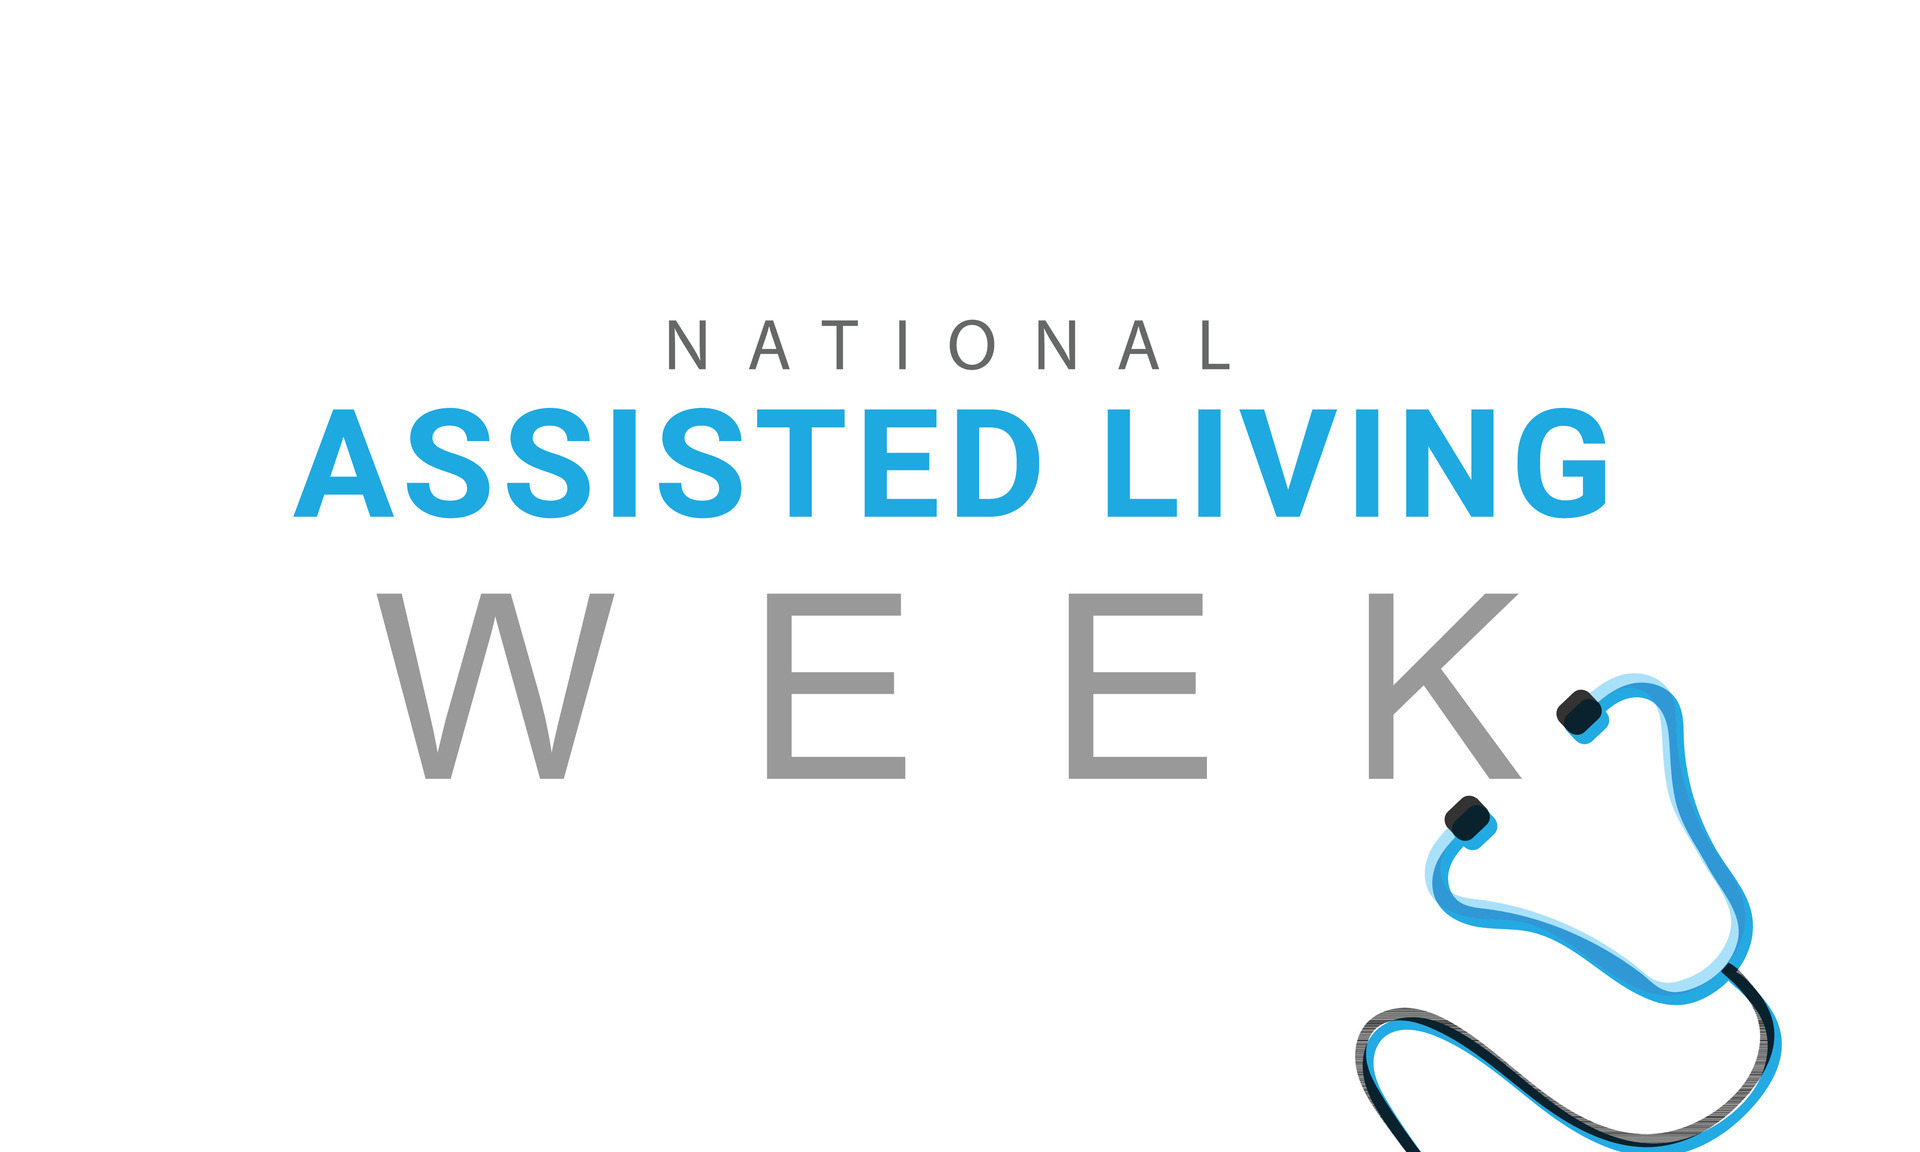 National assisted living week. background, banner, card, poster